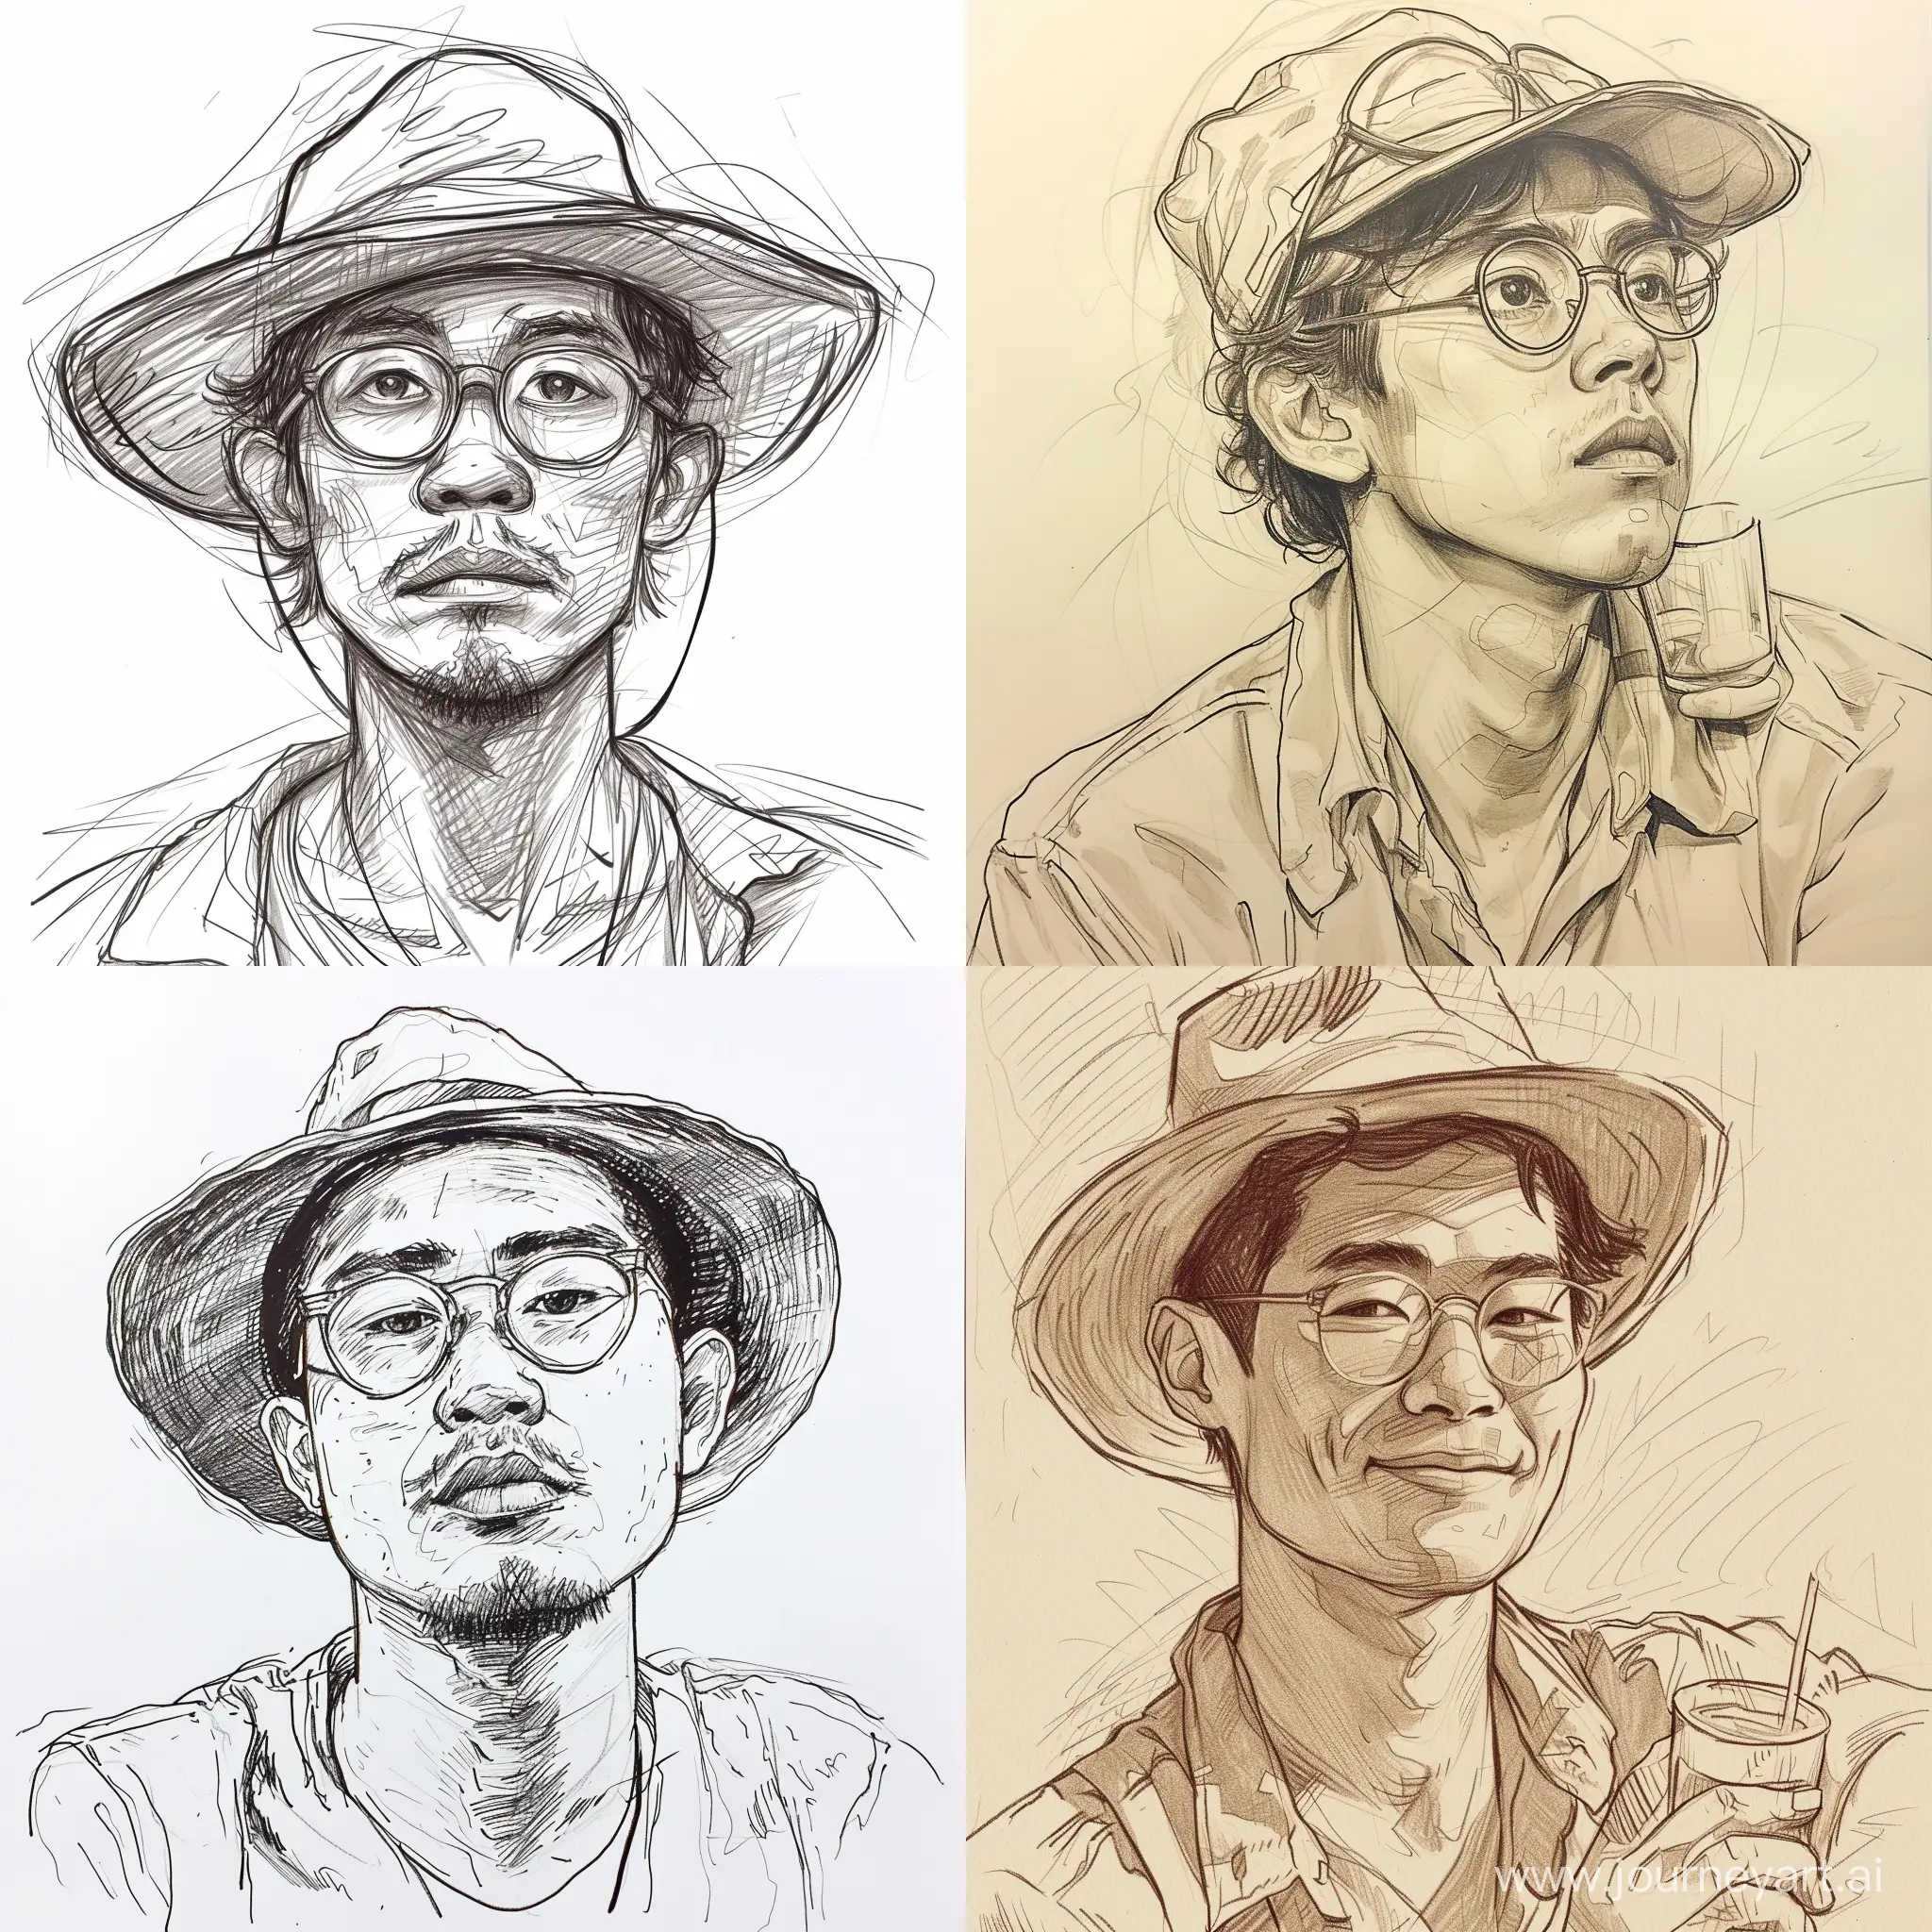 Stylish-Southeast-Asian-Man-with-Glasses-and-Hat